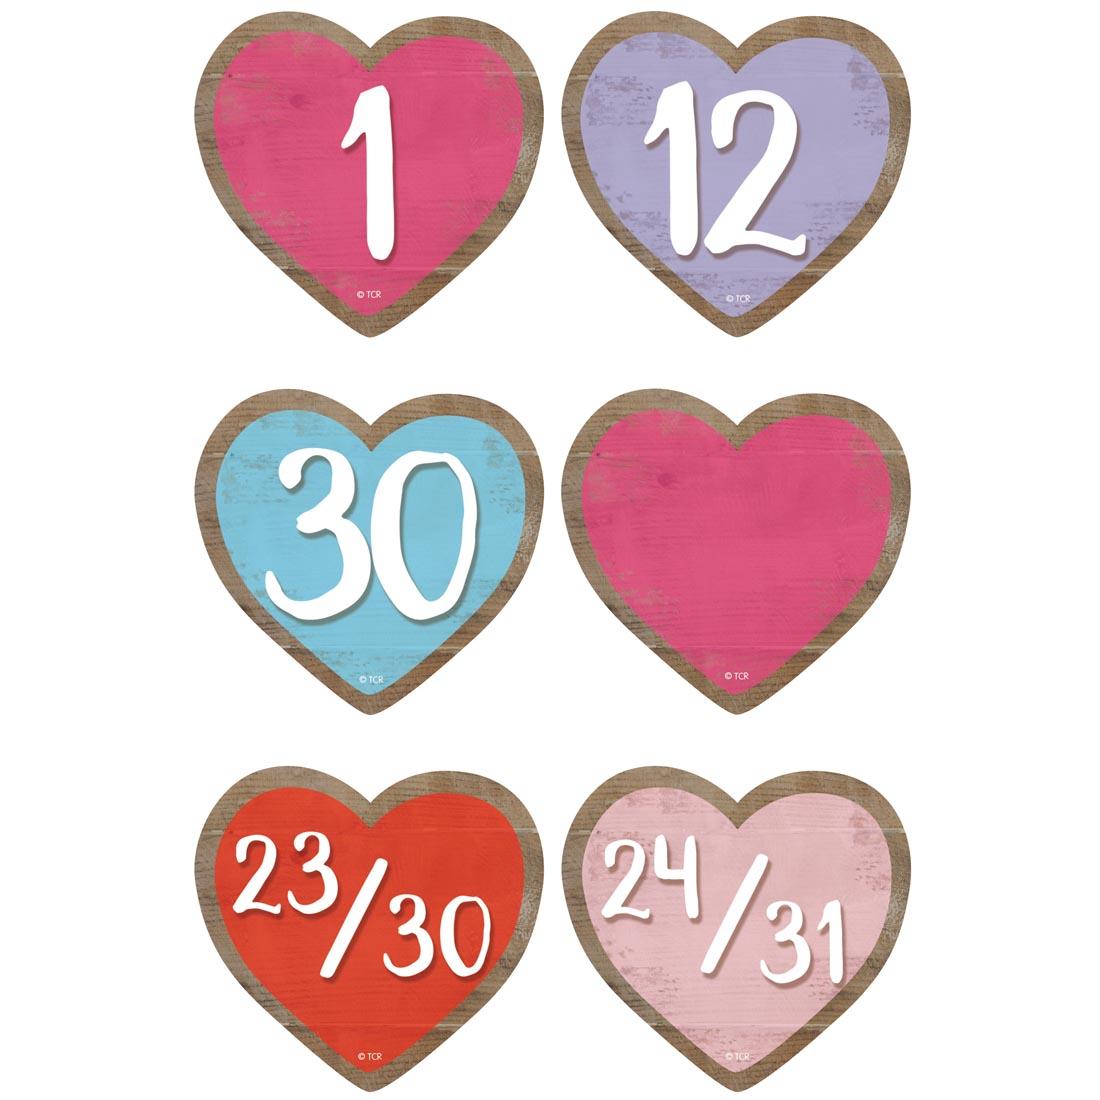 Hearts Calendar Days from the Home Sweet Classroom collection by Teacher Created Resources